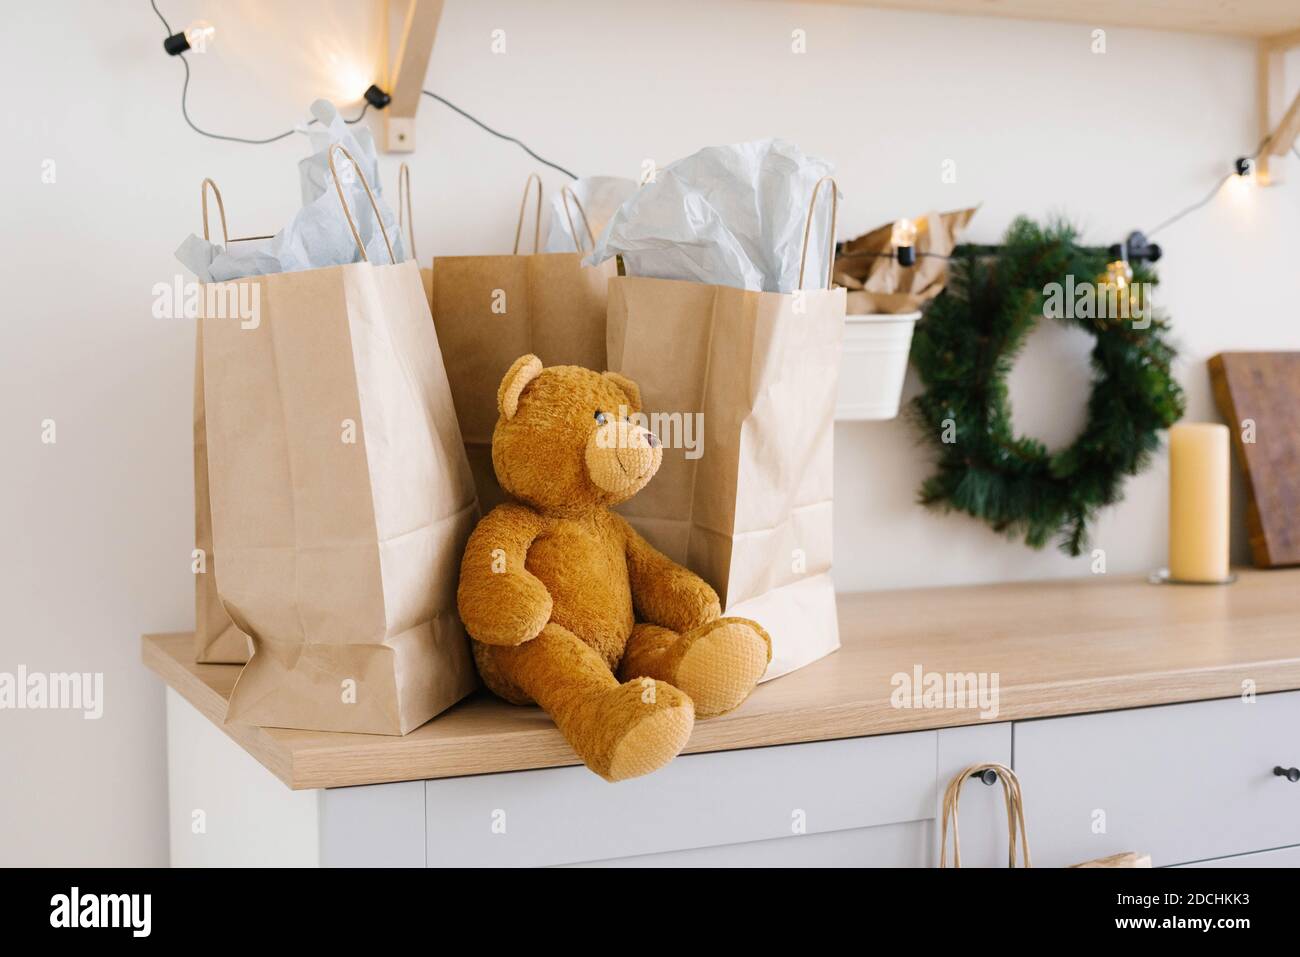 Soft toy bear near craft paper bags and Christmas wreath Stock Photo